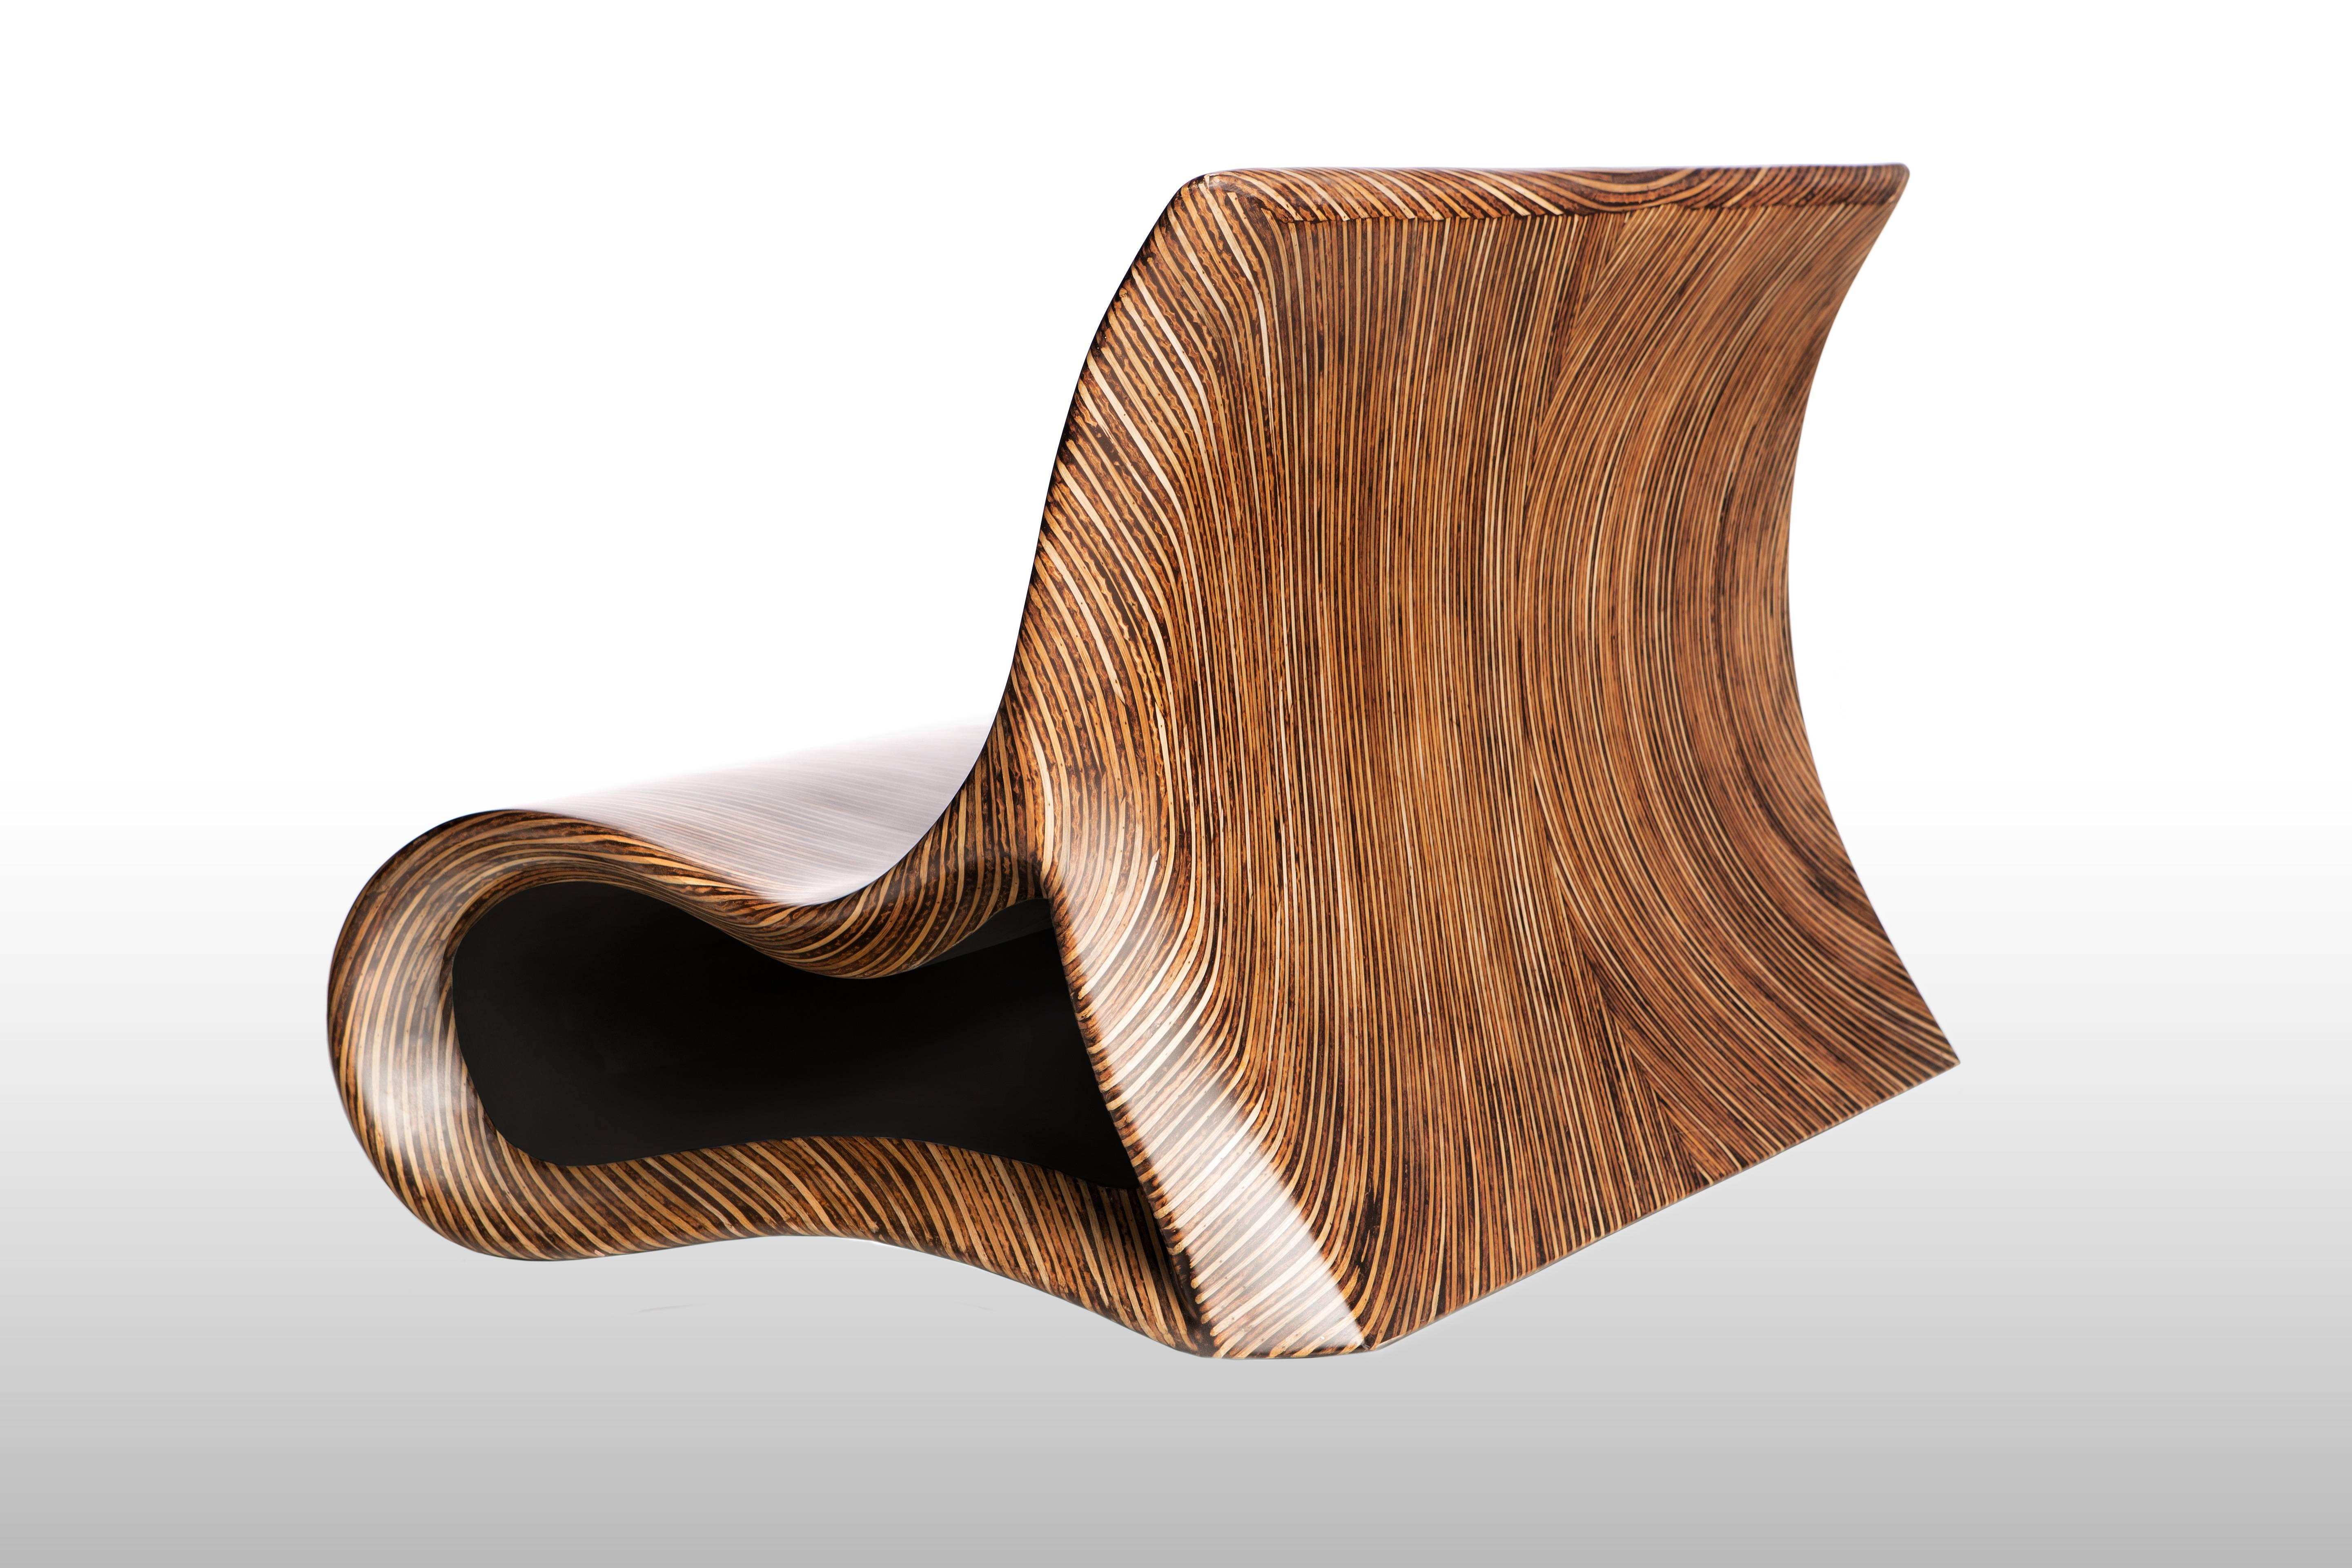 The Altoum Double seater is a mesmerizing piece of furniture, with its meandering curves and seemingly endless tree rings. The shape of this seat takes inspiration from Op Art whilst the sophisticated wood lamination finish breathes life into it.